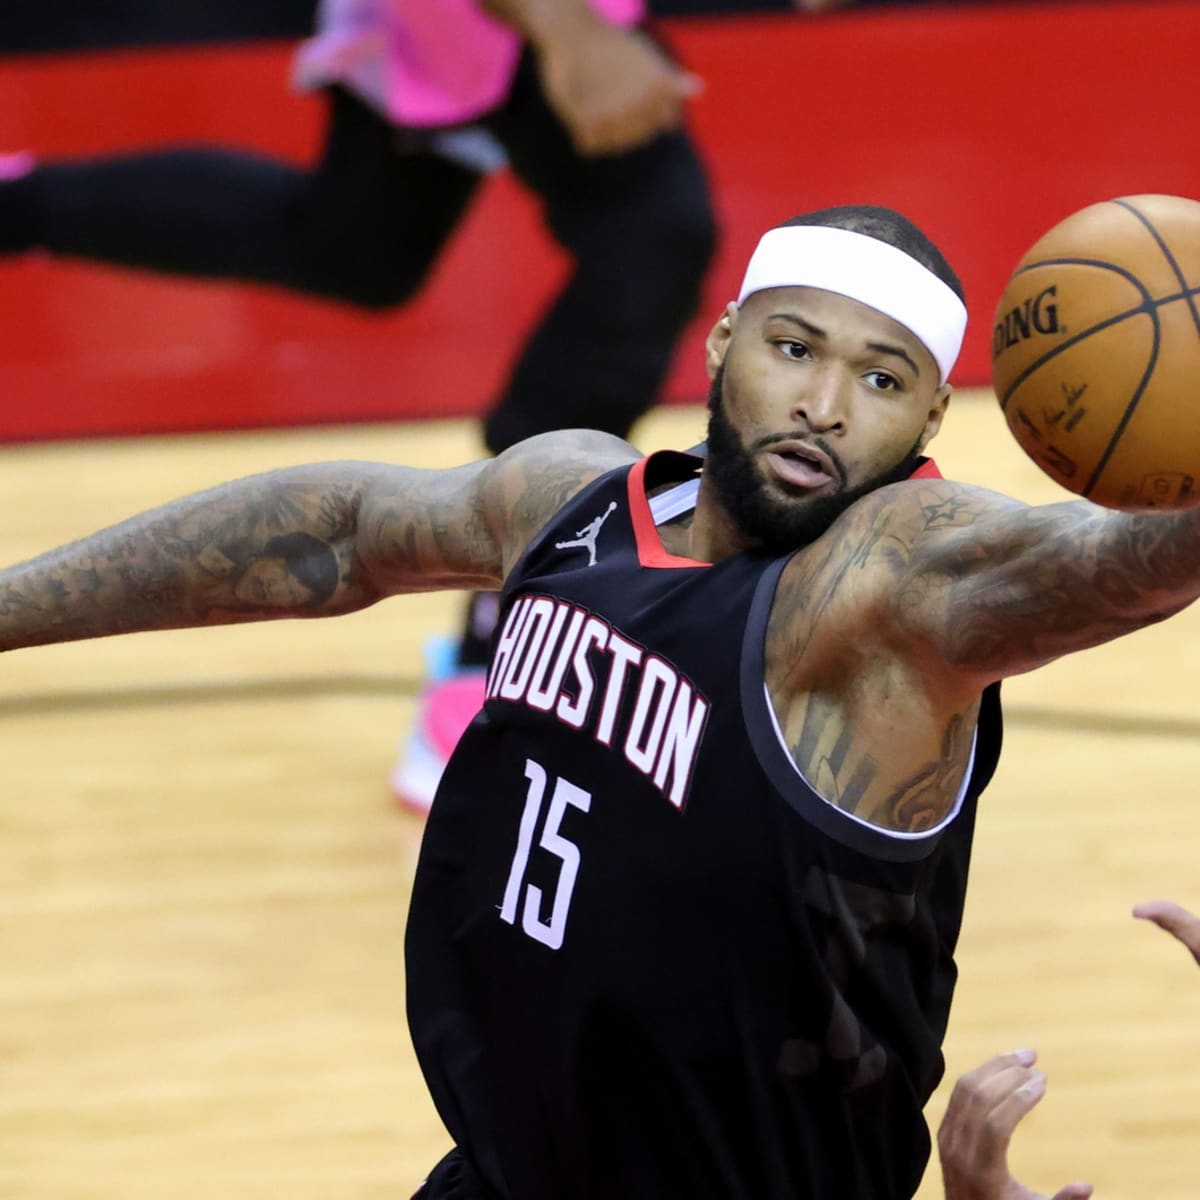 Los Angeles Clippers sign DeMarcus Cousins to 10-day contract